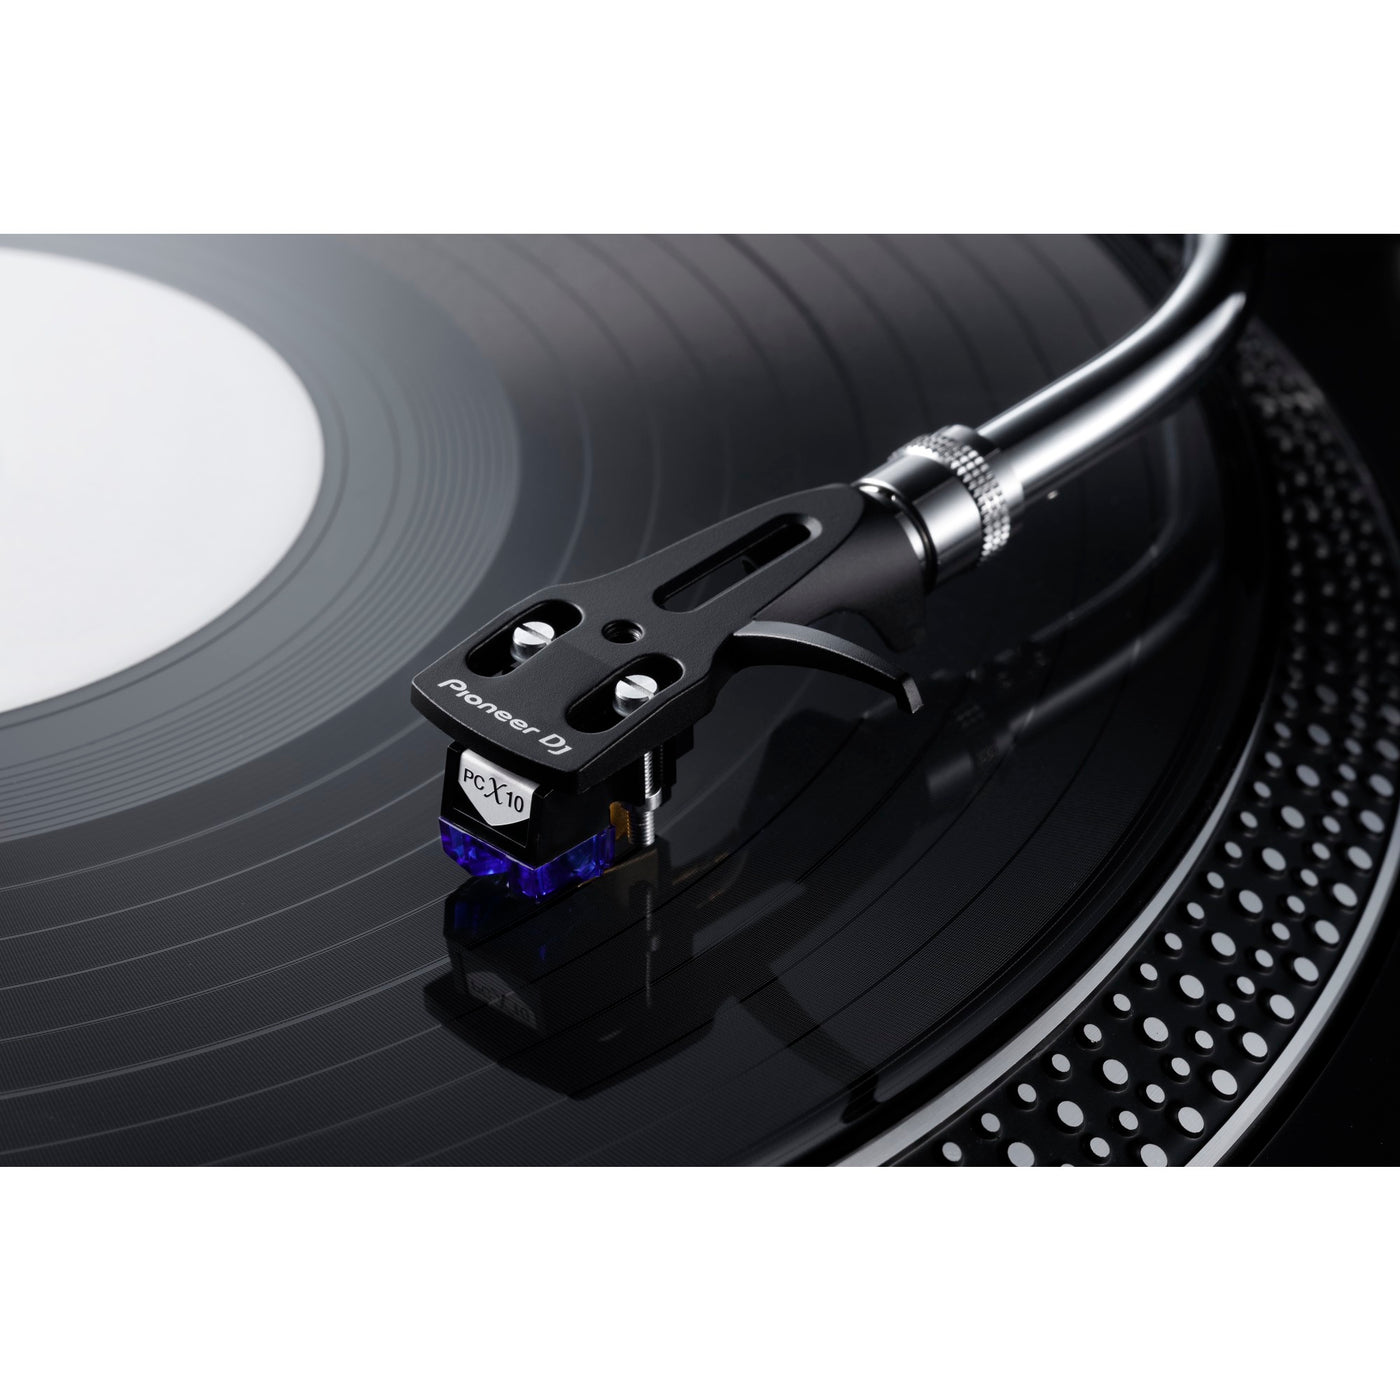 Pioneer DJ PC-HS01-S Professional Branded Headshell for DJ Turntable, Audio Equipment for DJ Booth, Silver